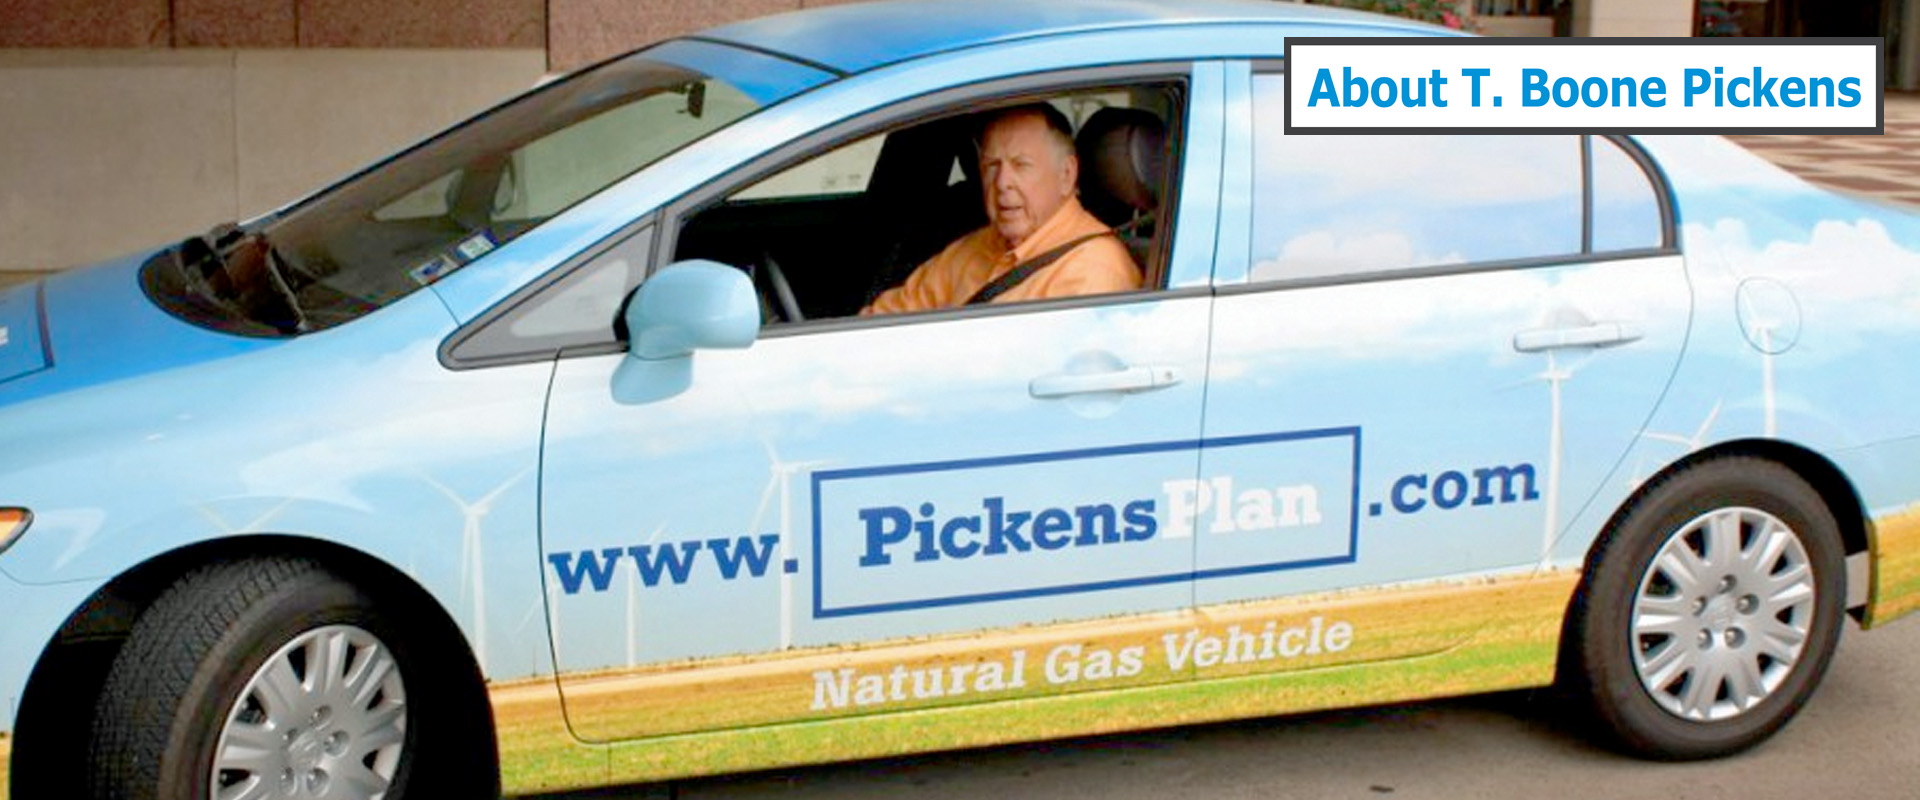 About T. Boone Pickens